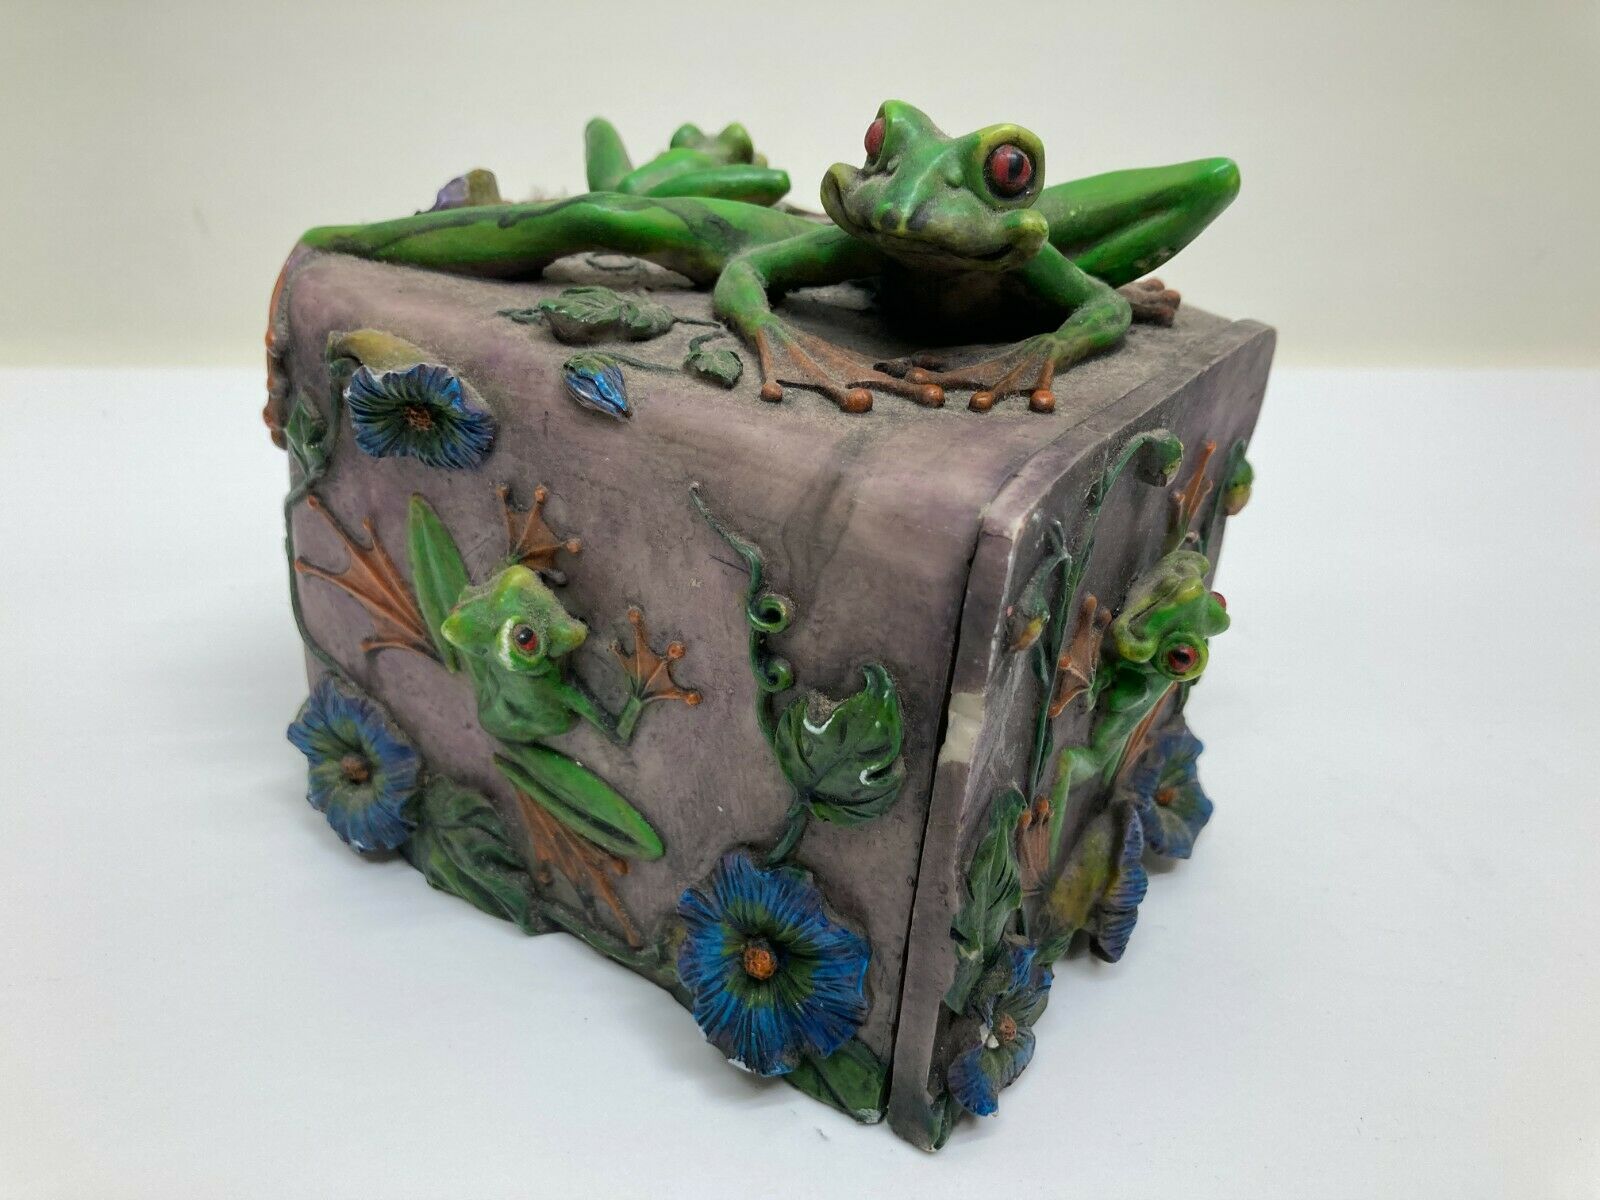 Jive 2004 Dow Green Tree Frog Puzzle Trinket Box Figurine maybe Missing Piece